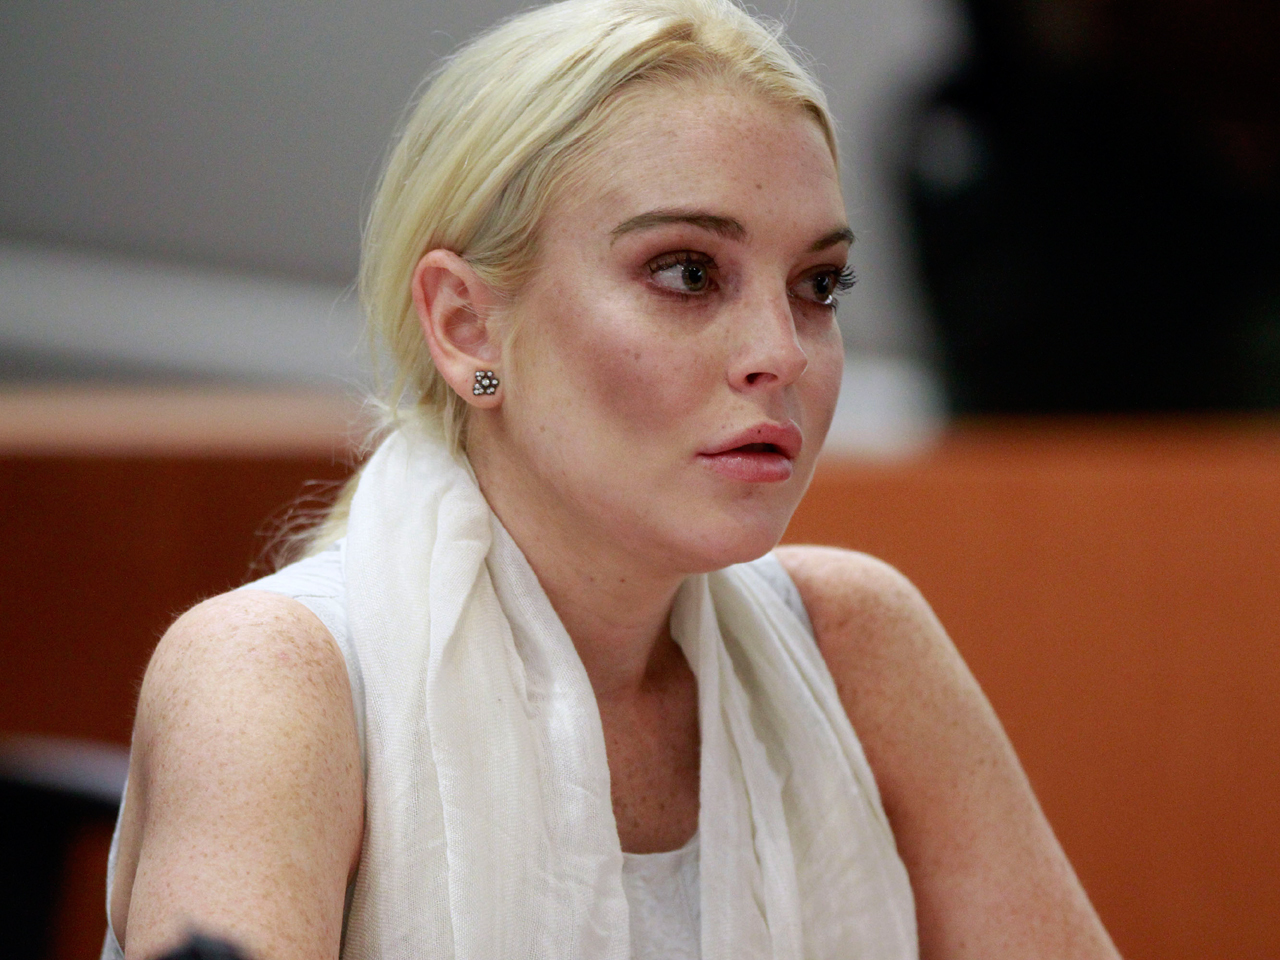 Lindsay Lohan Turned Away At Morgue After Arriving Late Cbs News 9411